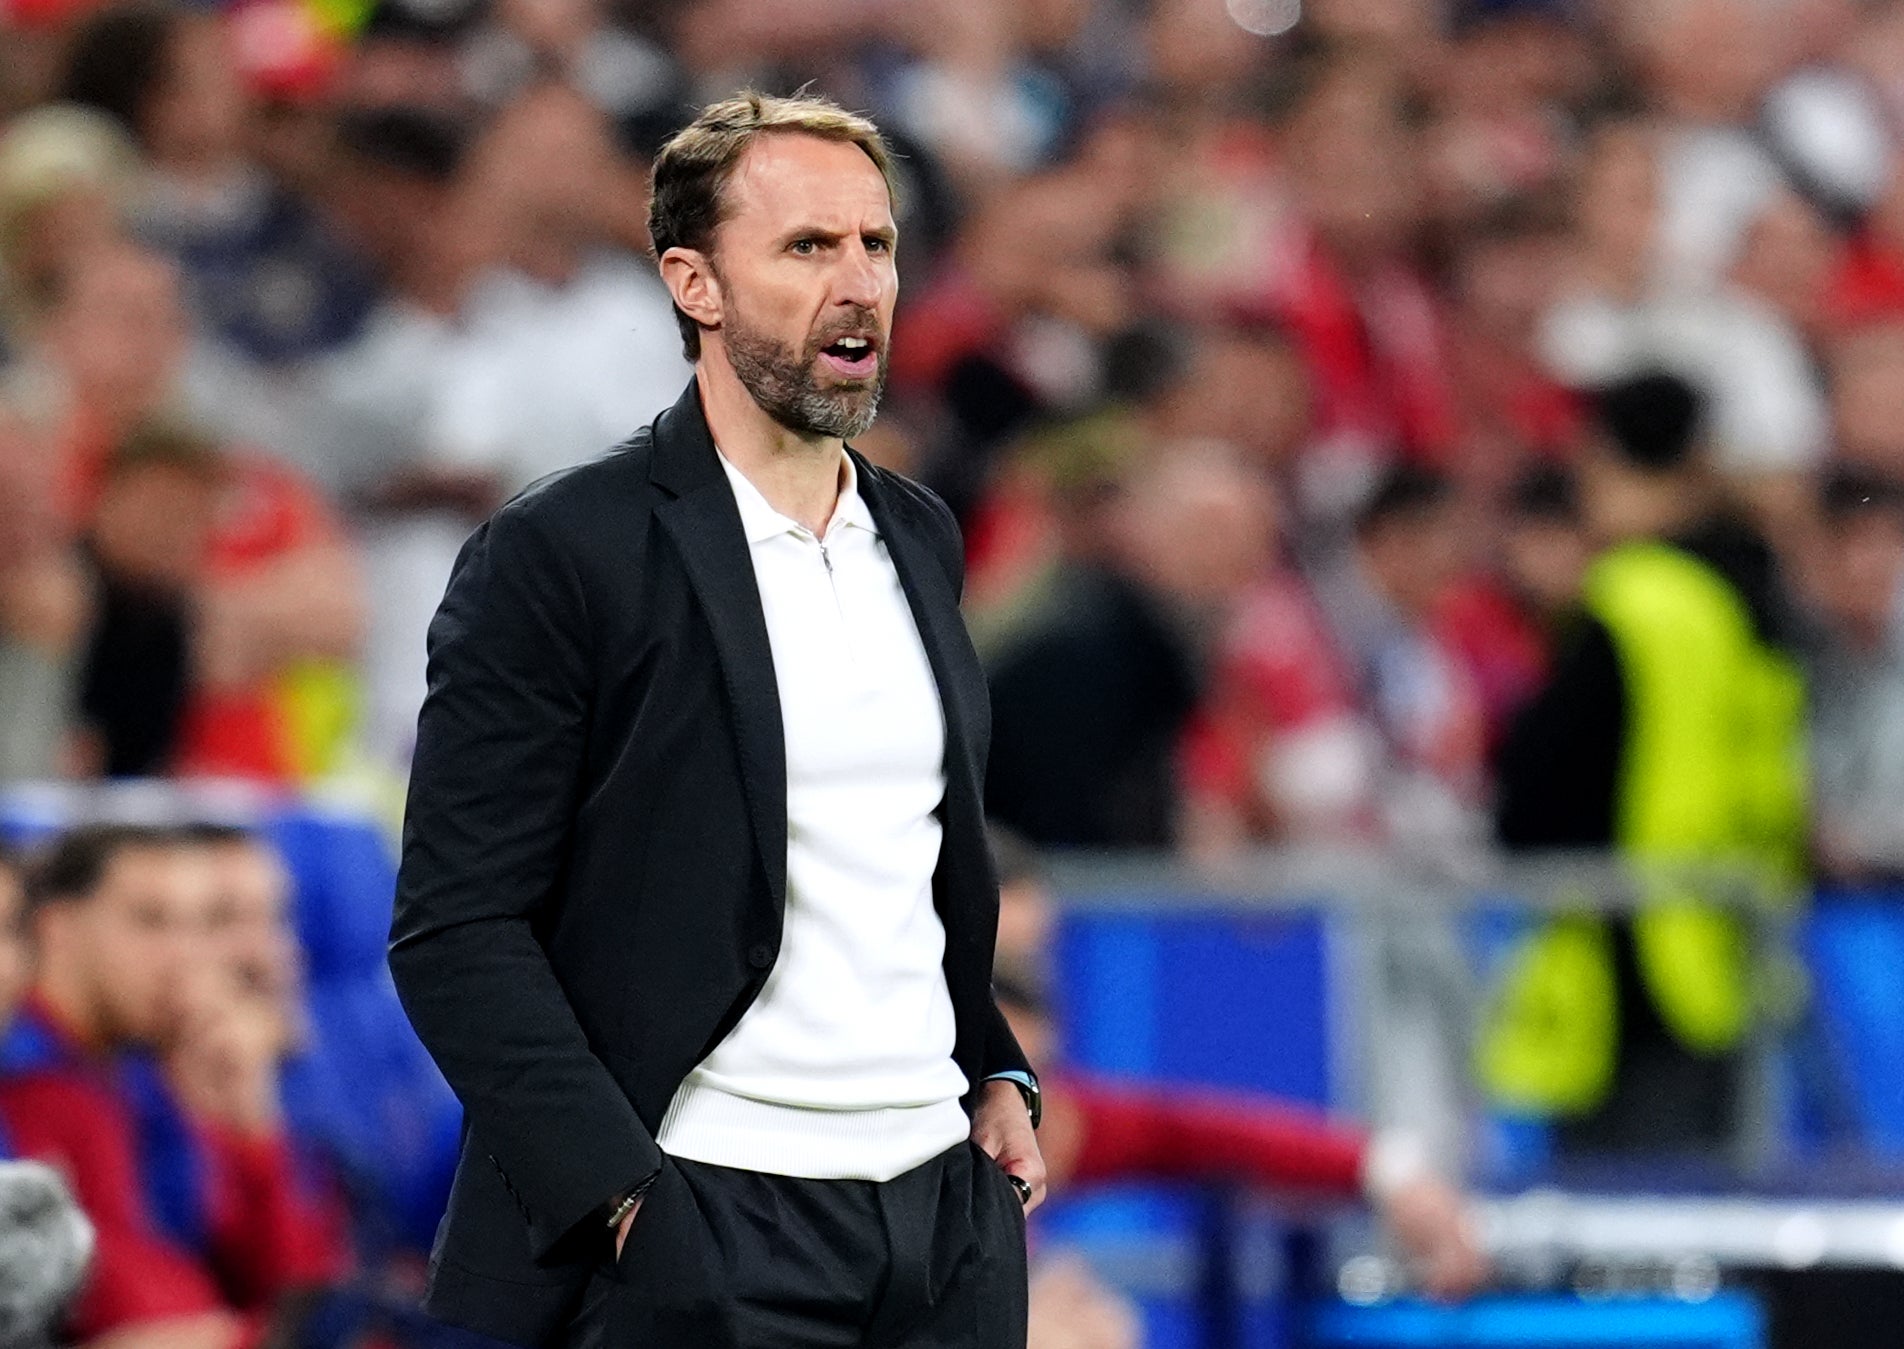 England head coach Southgate has several puzzles to solve before the next game